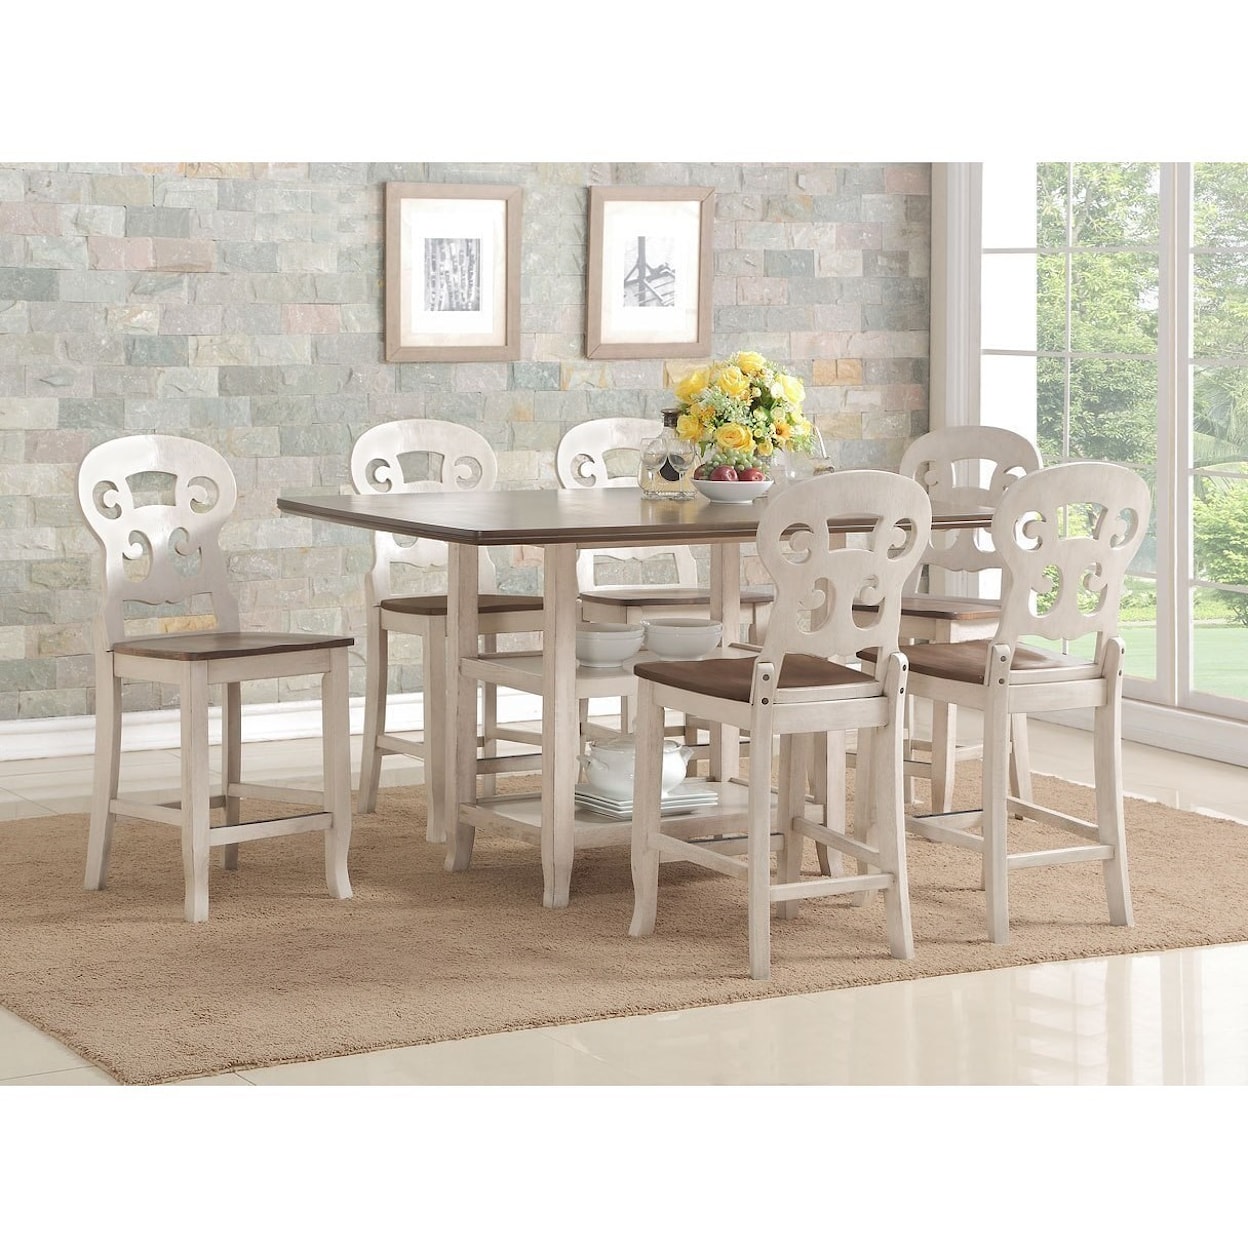 Avalon Furniture Cameo 7-Pc Pub Table and Chair Set